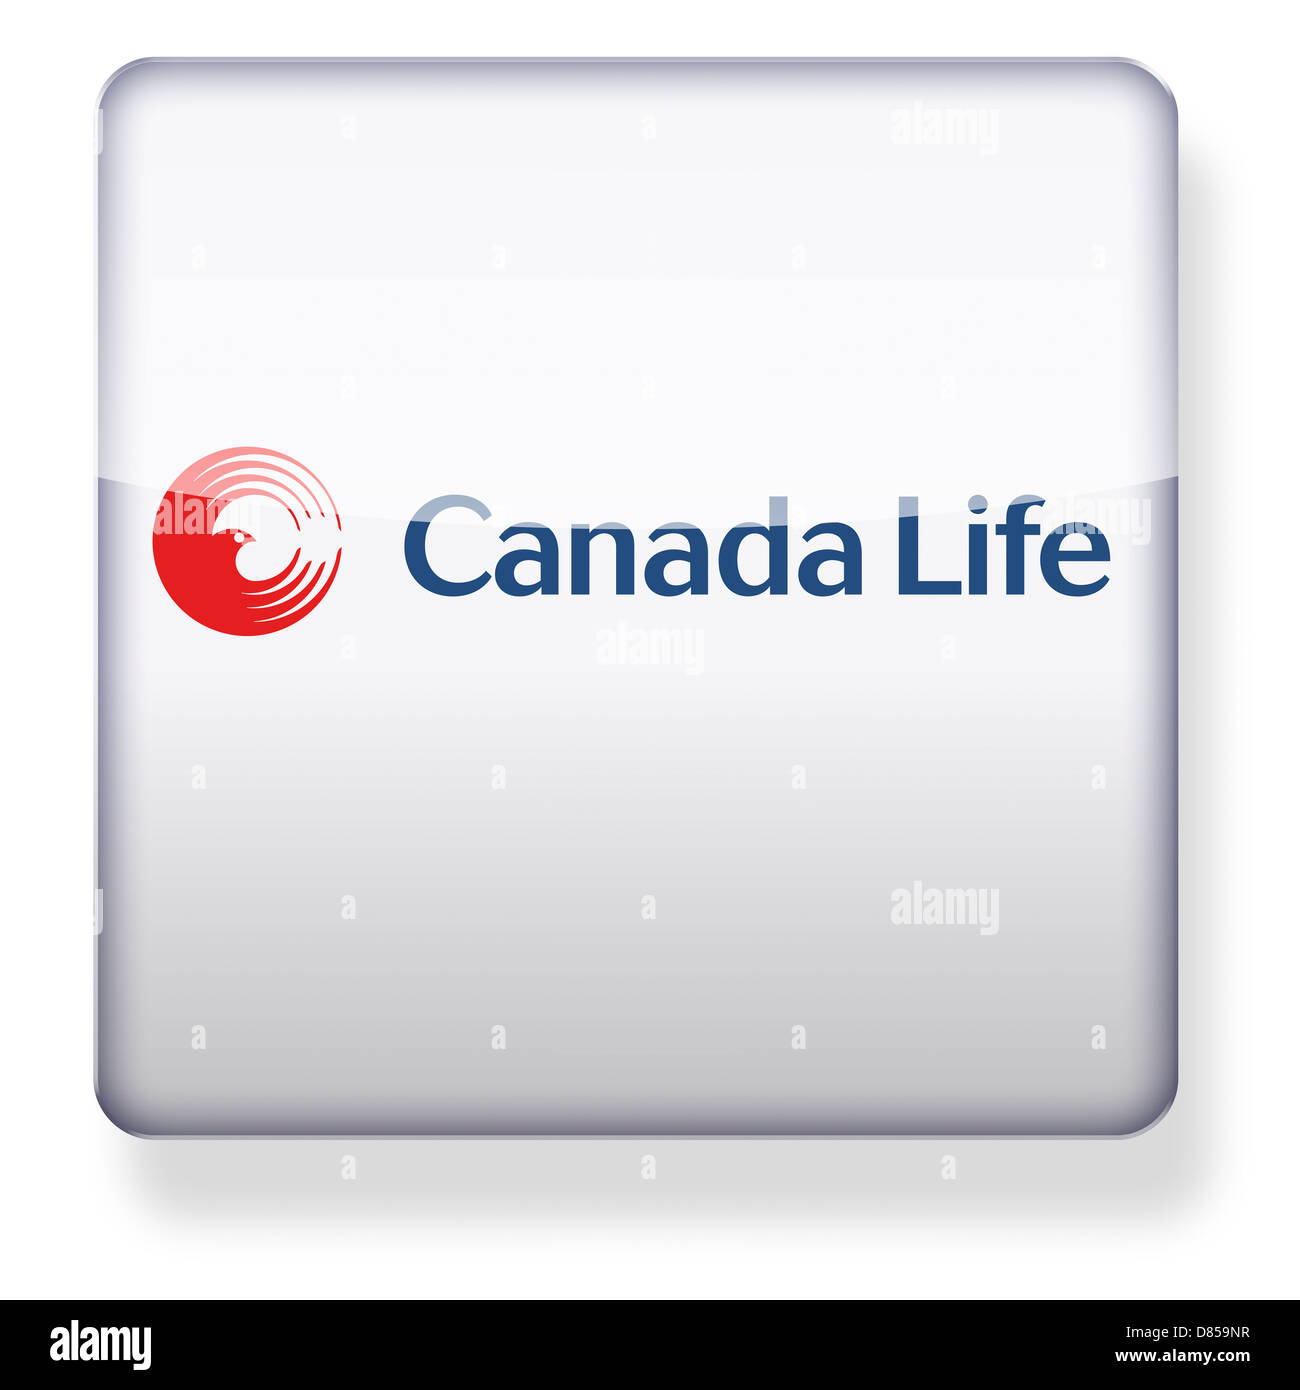 Canada Life logo as an app icon. Clipping path included. Stock Photo